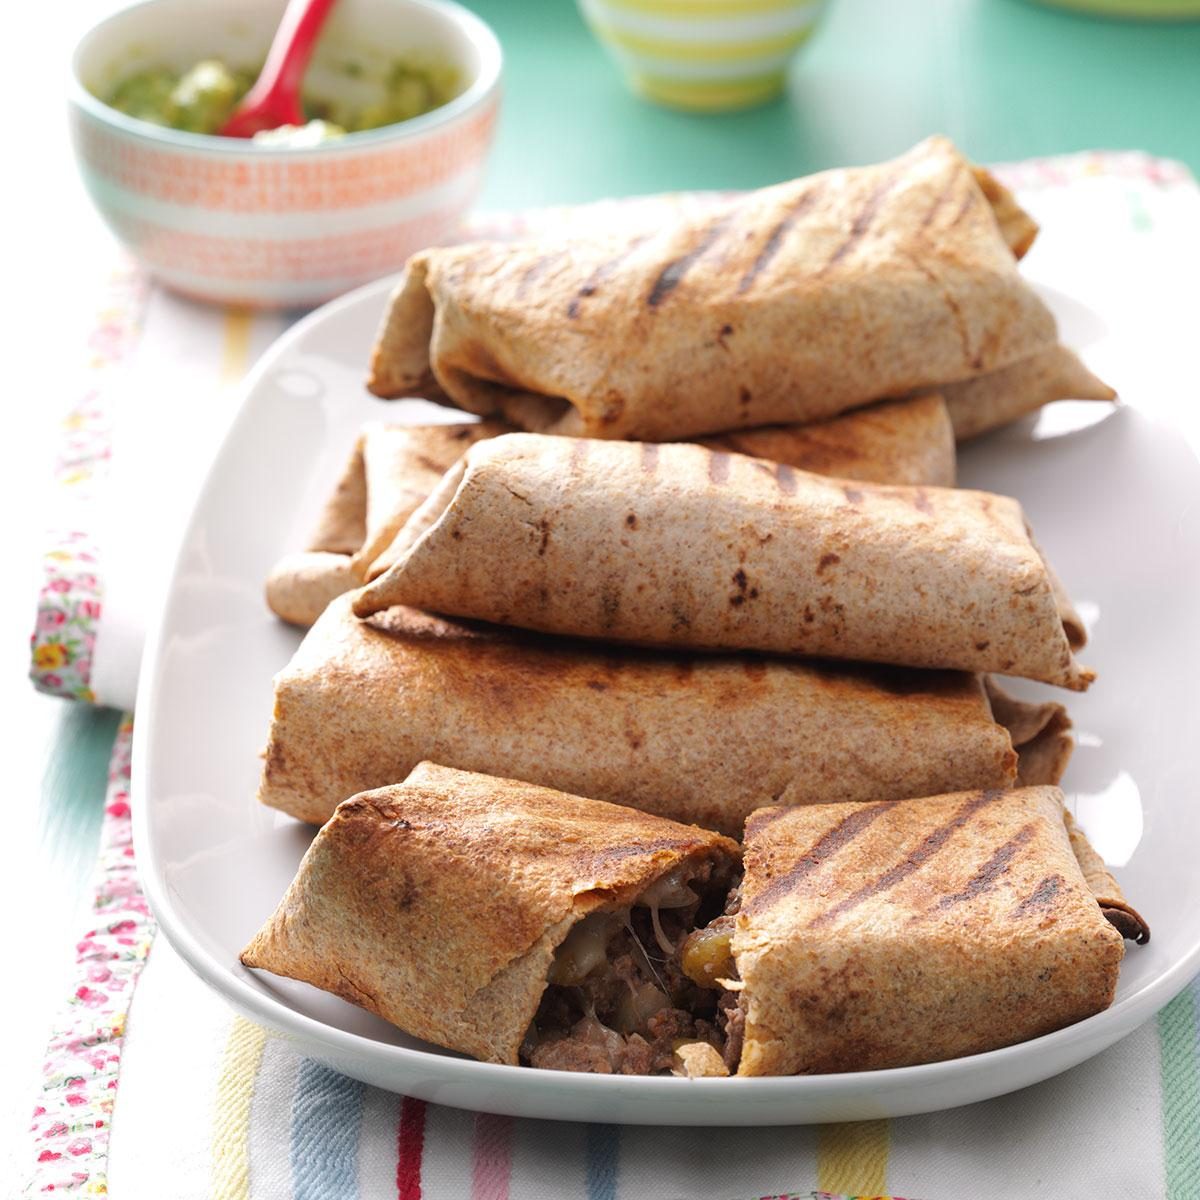 Tuesday: Grilled Beef Chimichangas